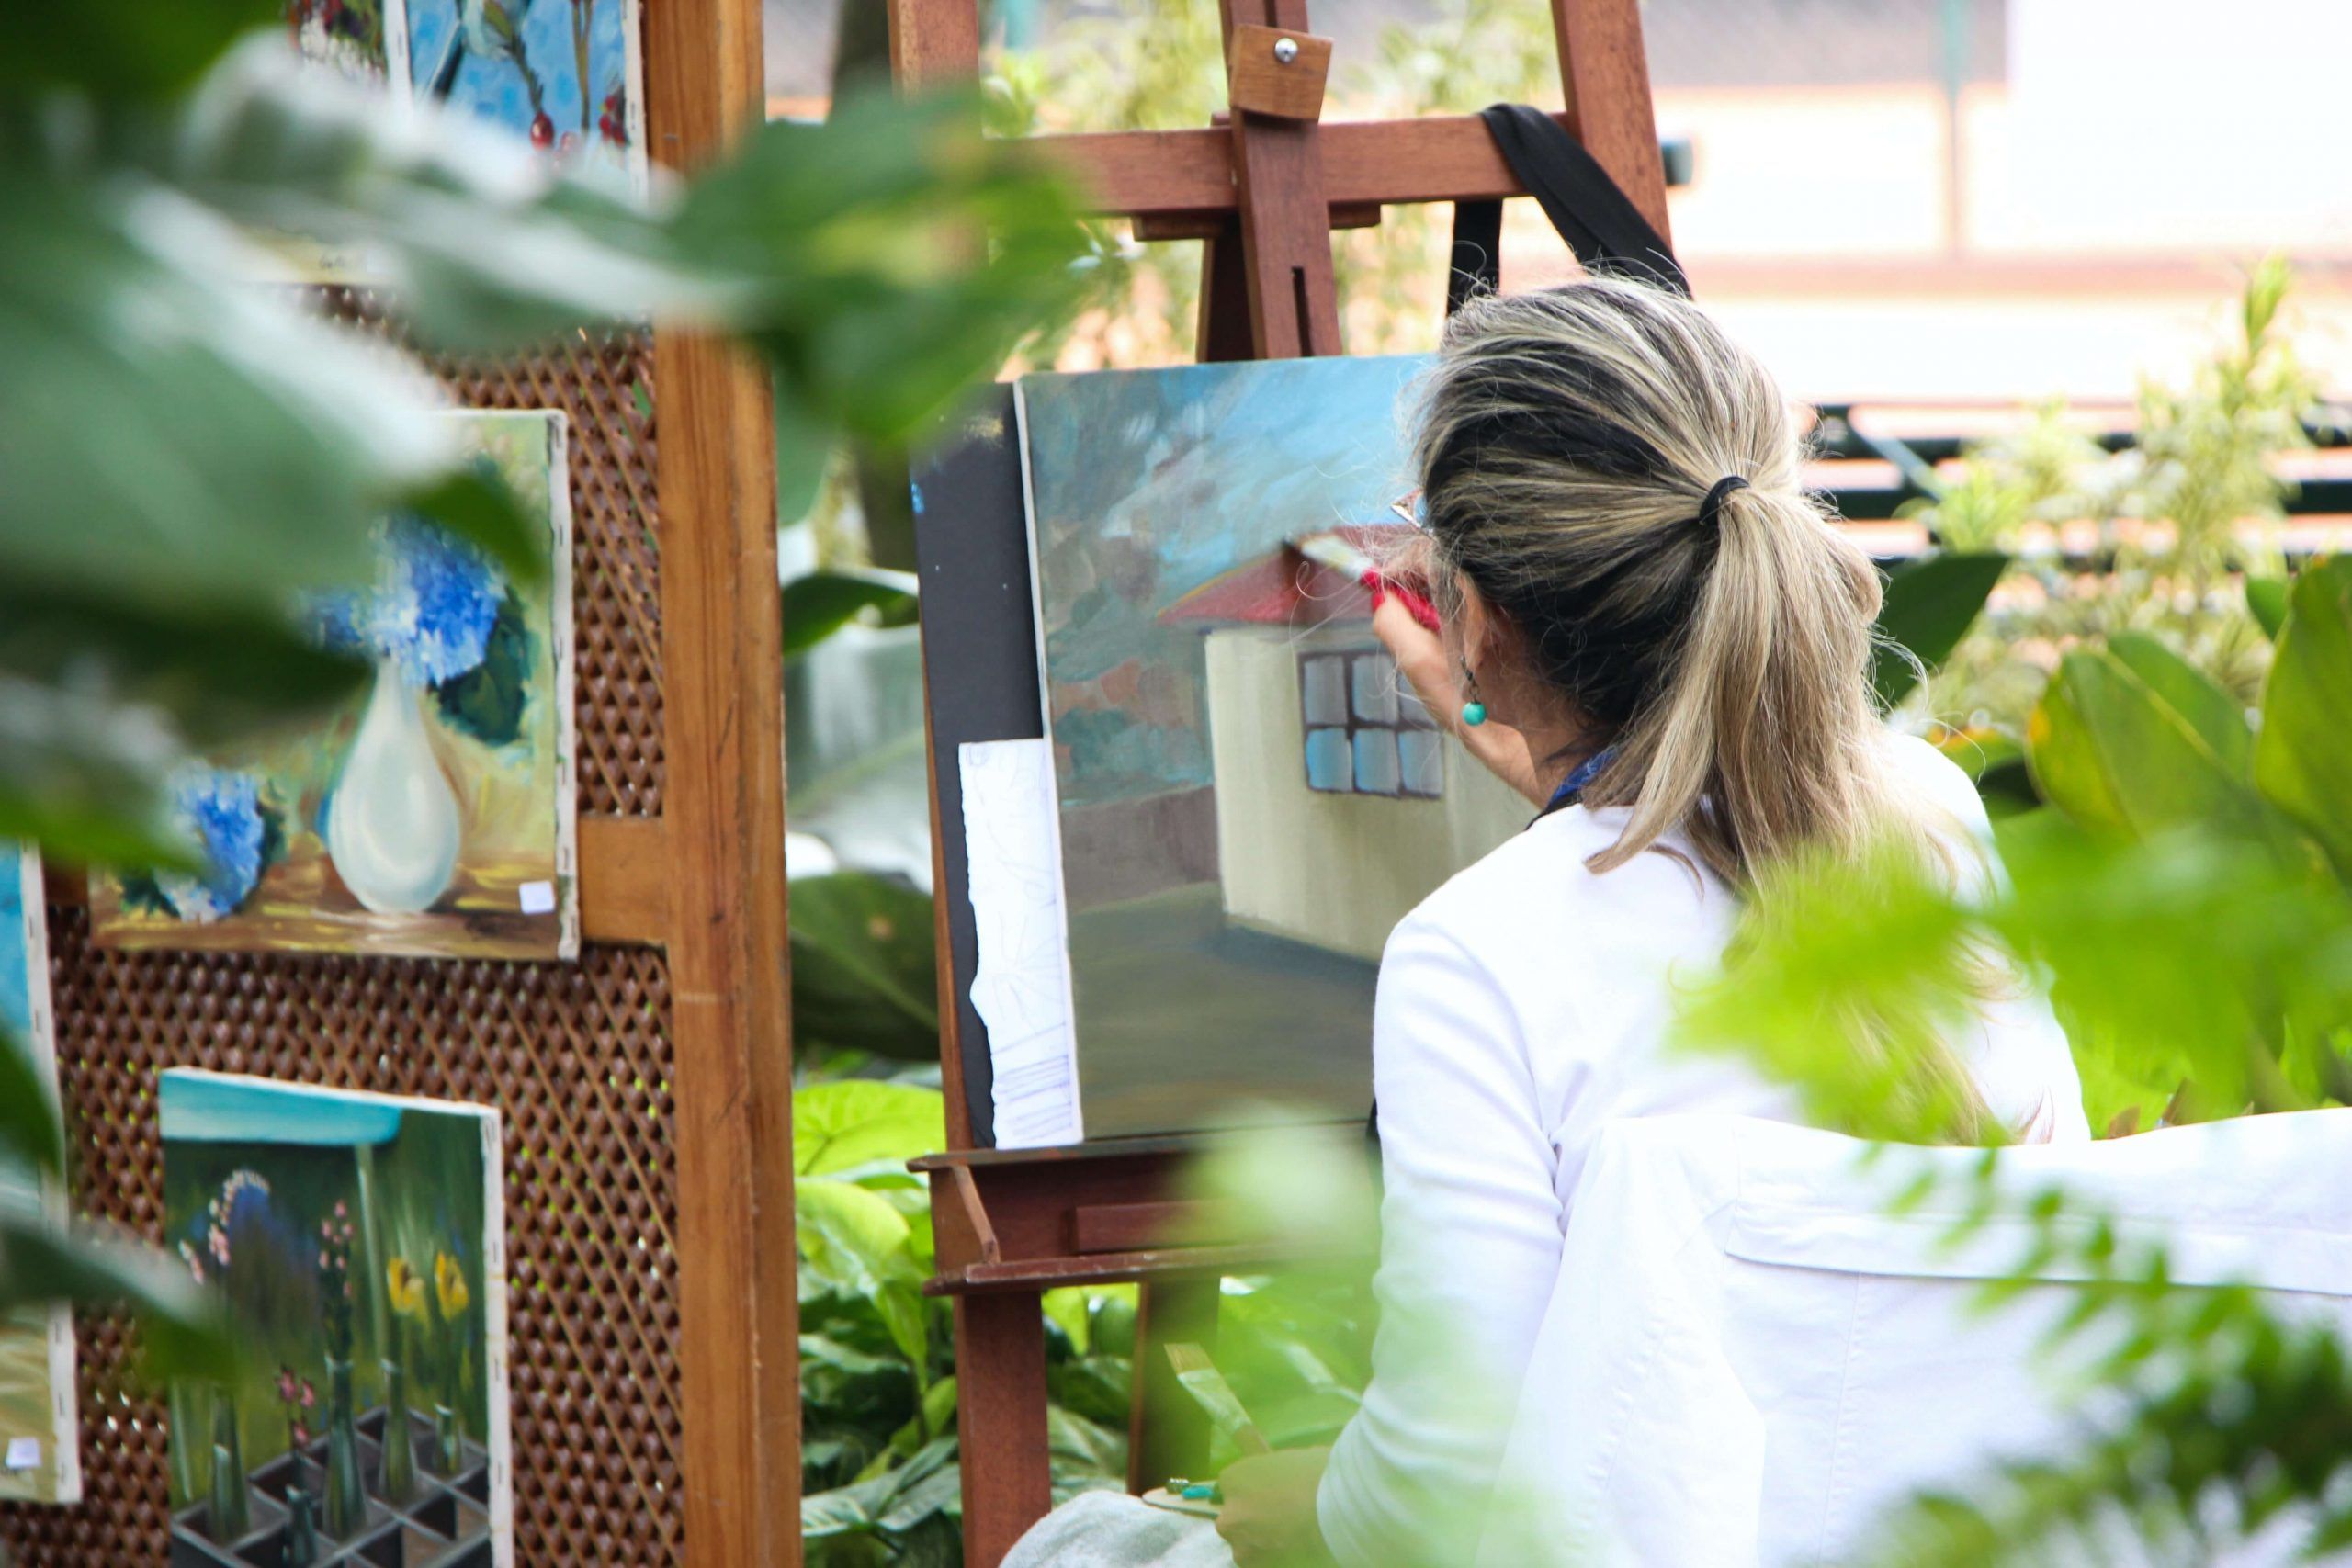 Painter painting on canvas in the outdoors